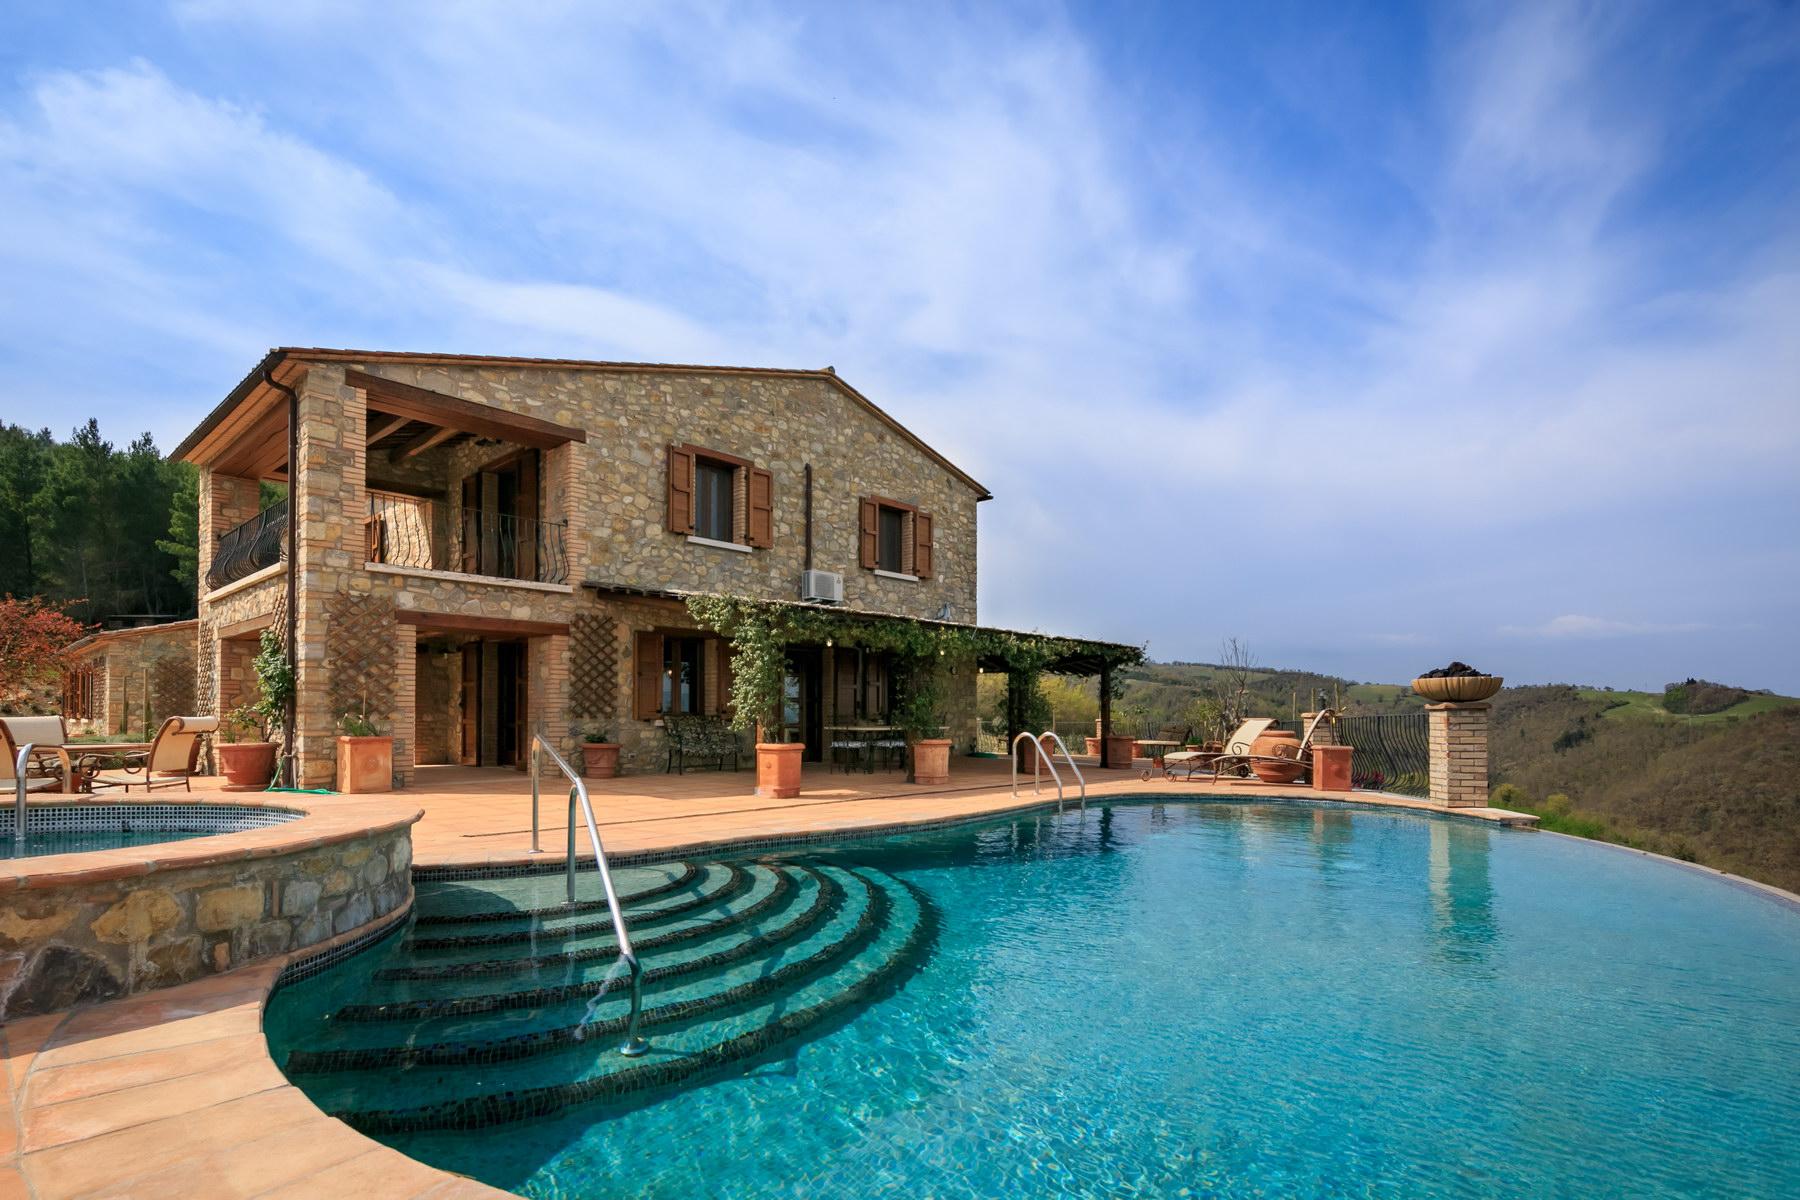 Outstanding property nestled on the umbrian hills - 2